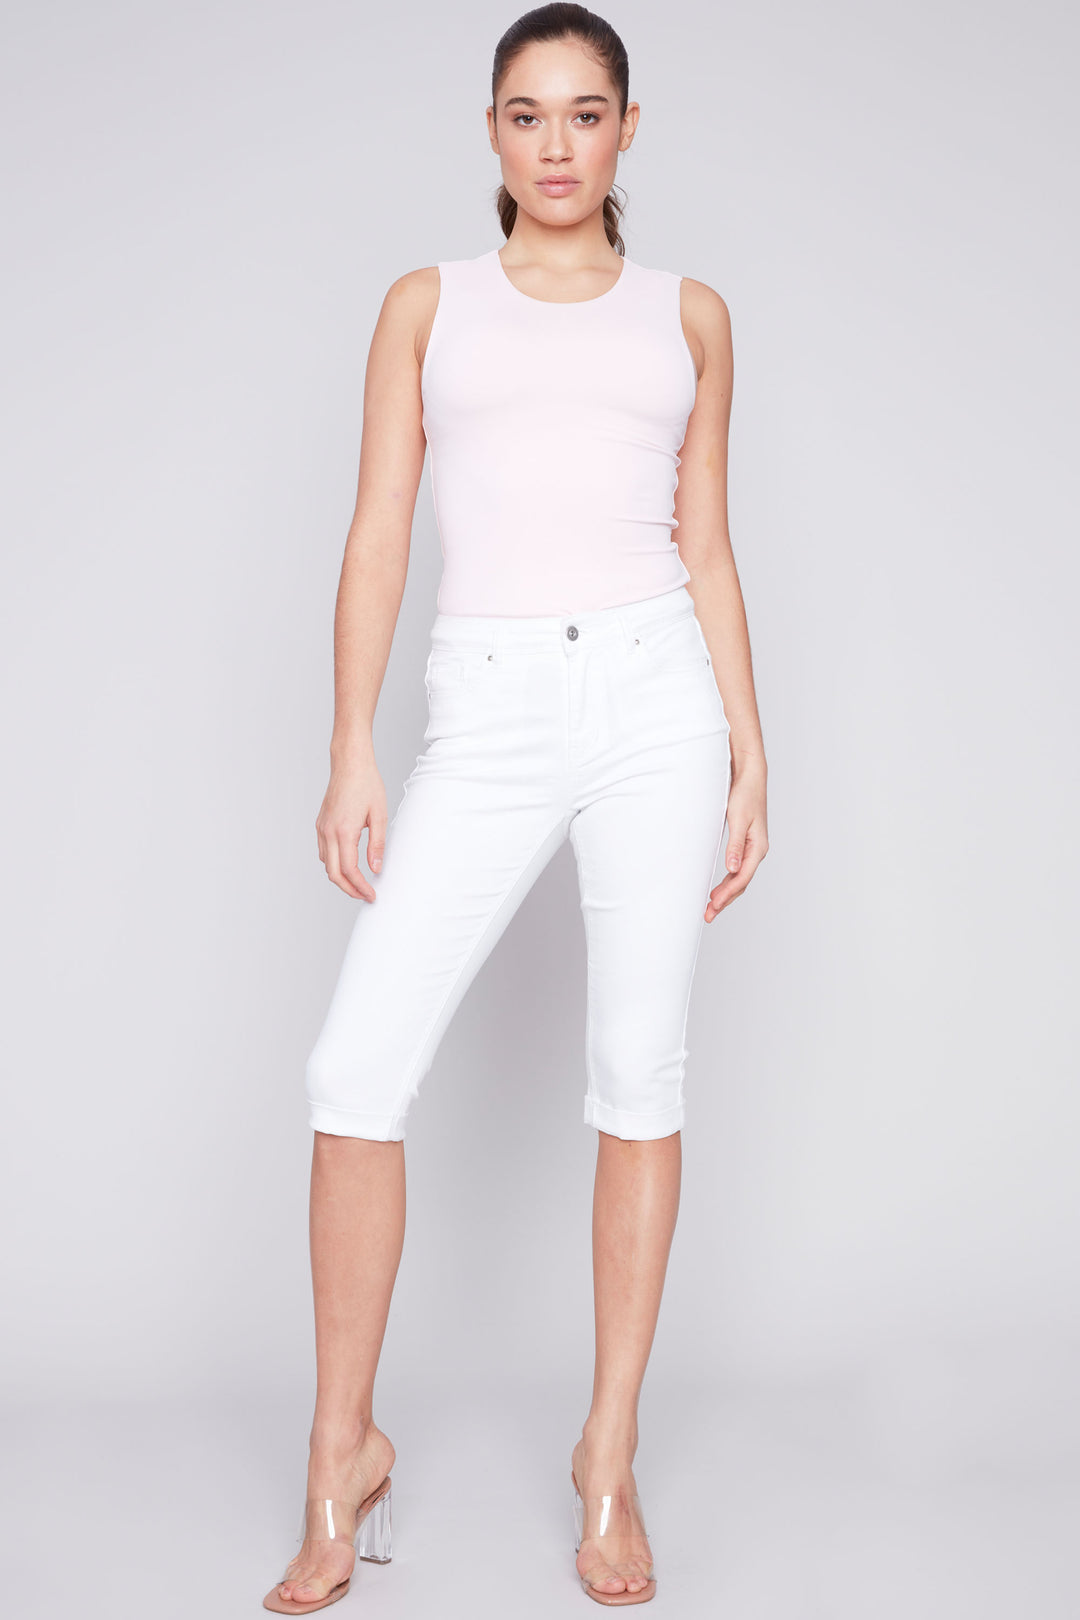 Made from solid stretch twill fabric, these comfy cotton pants feature smart cuffed (folded) hems for a polished look. 